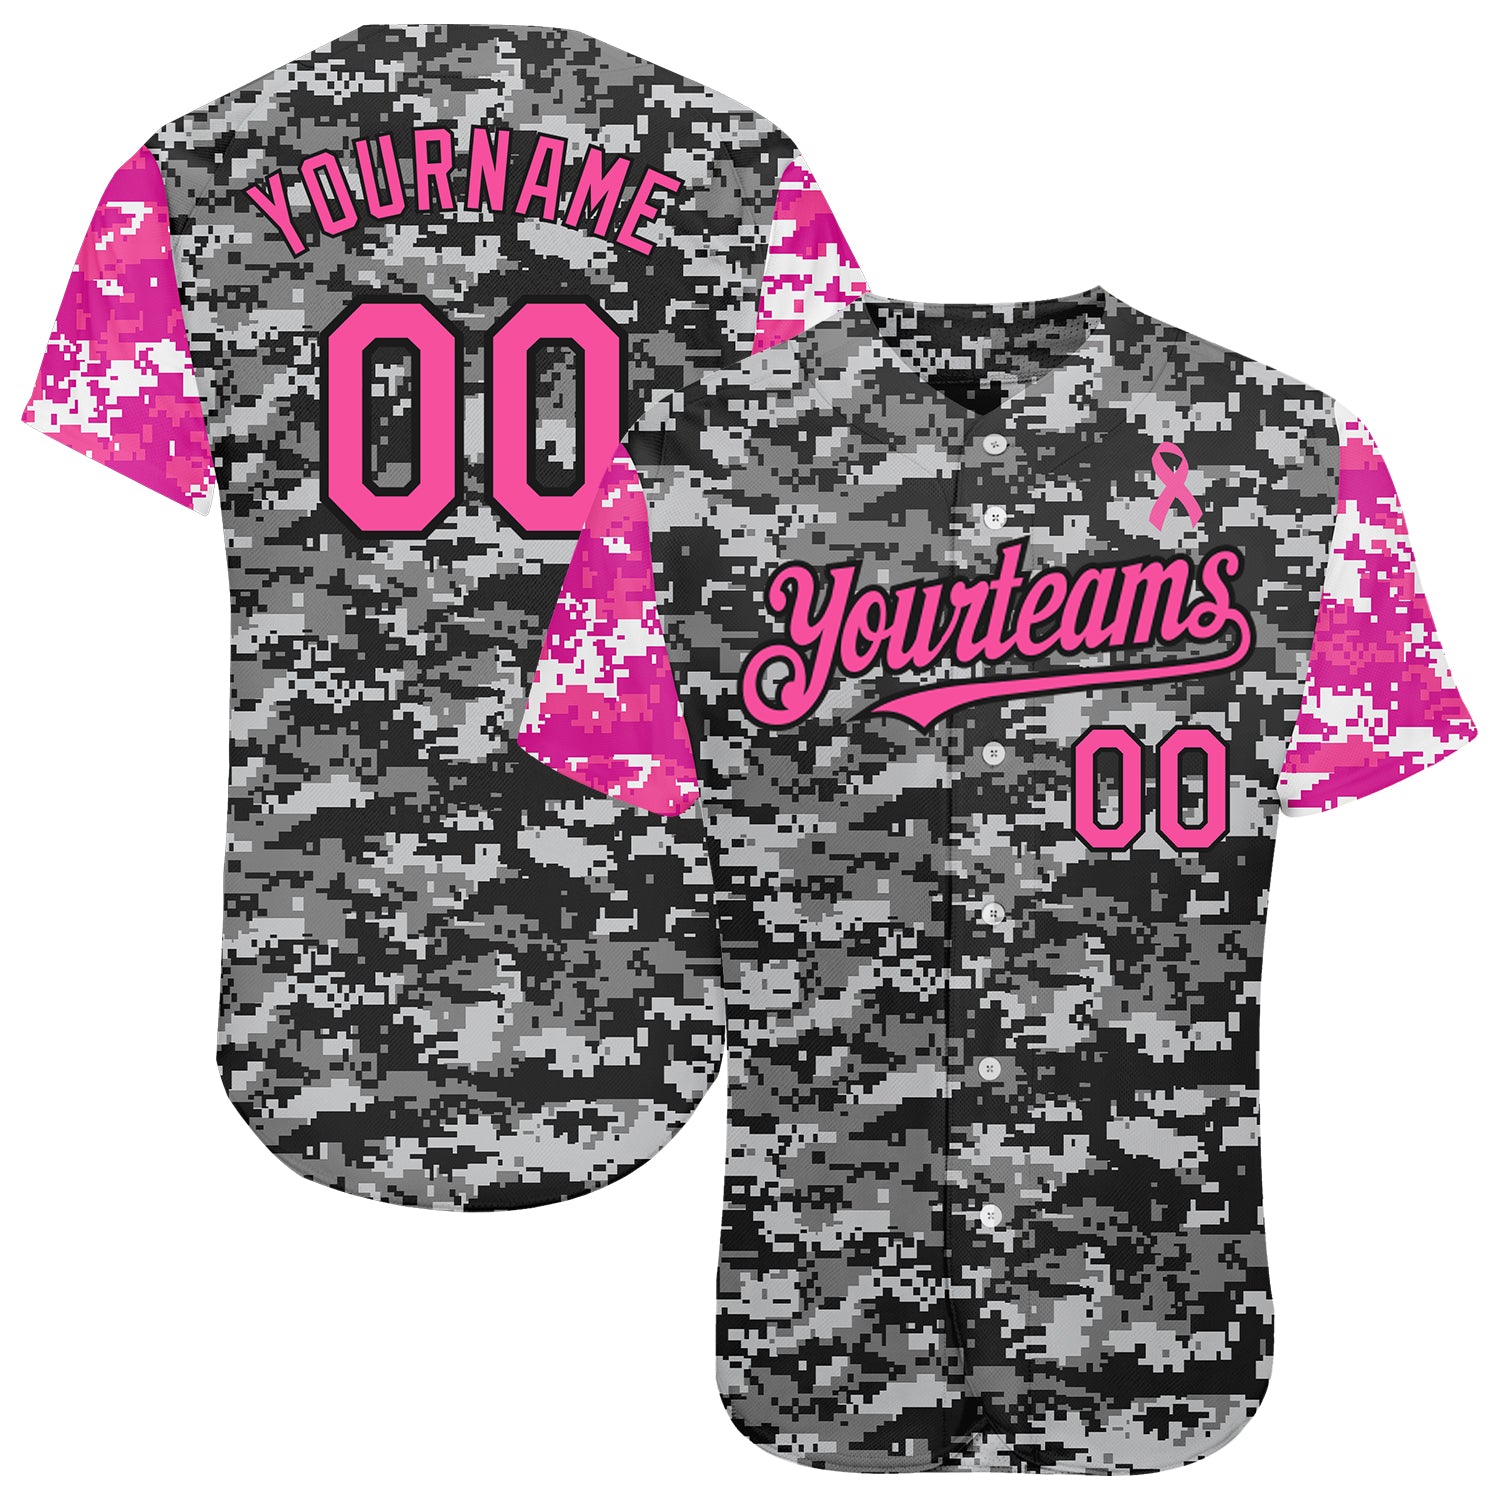 Camouflage jerseys: In support of, what exactly?